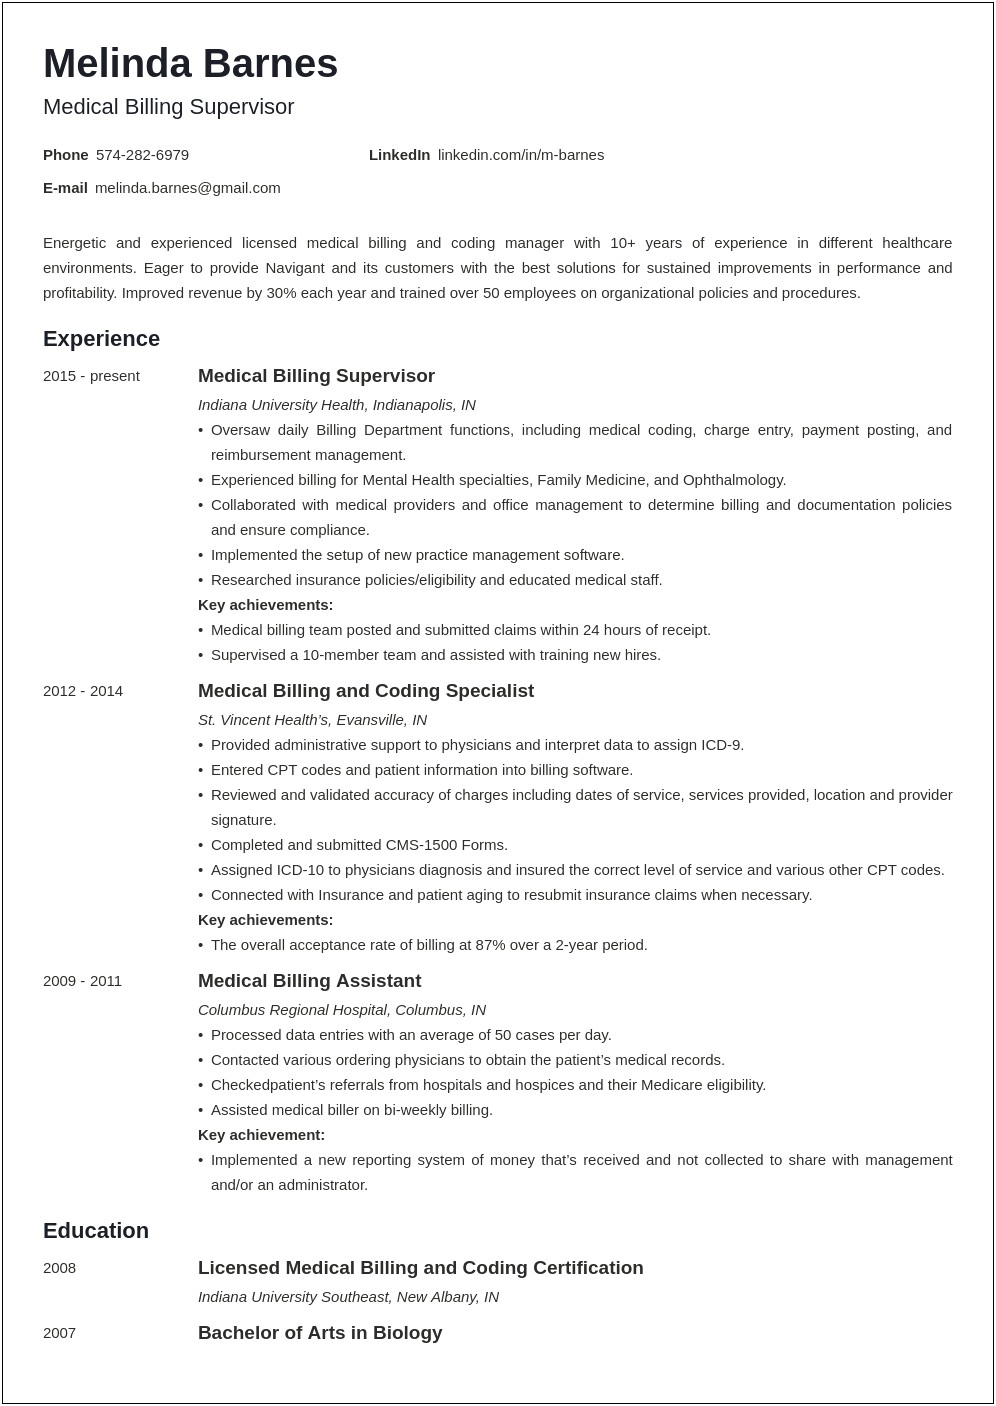 Resume Skills And Abilities For Medical Biller